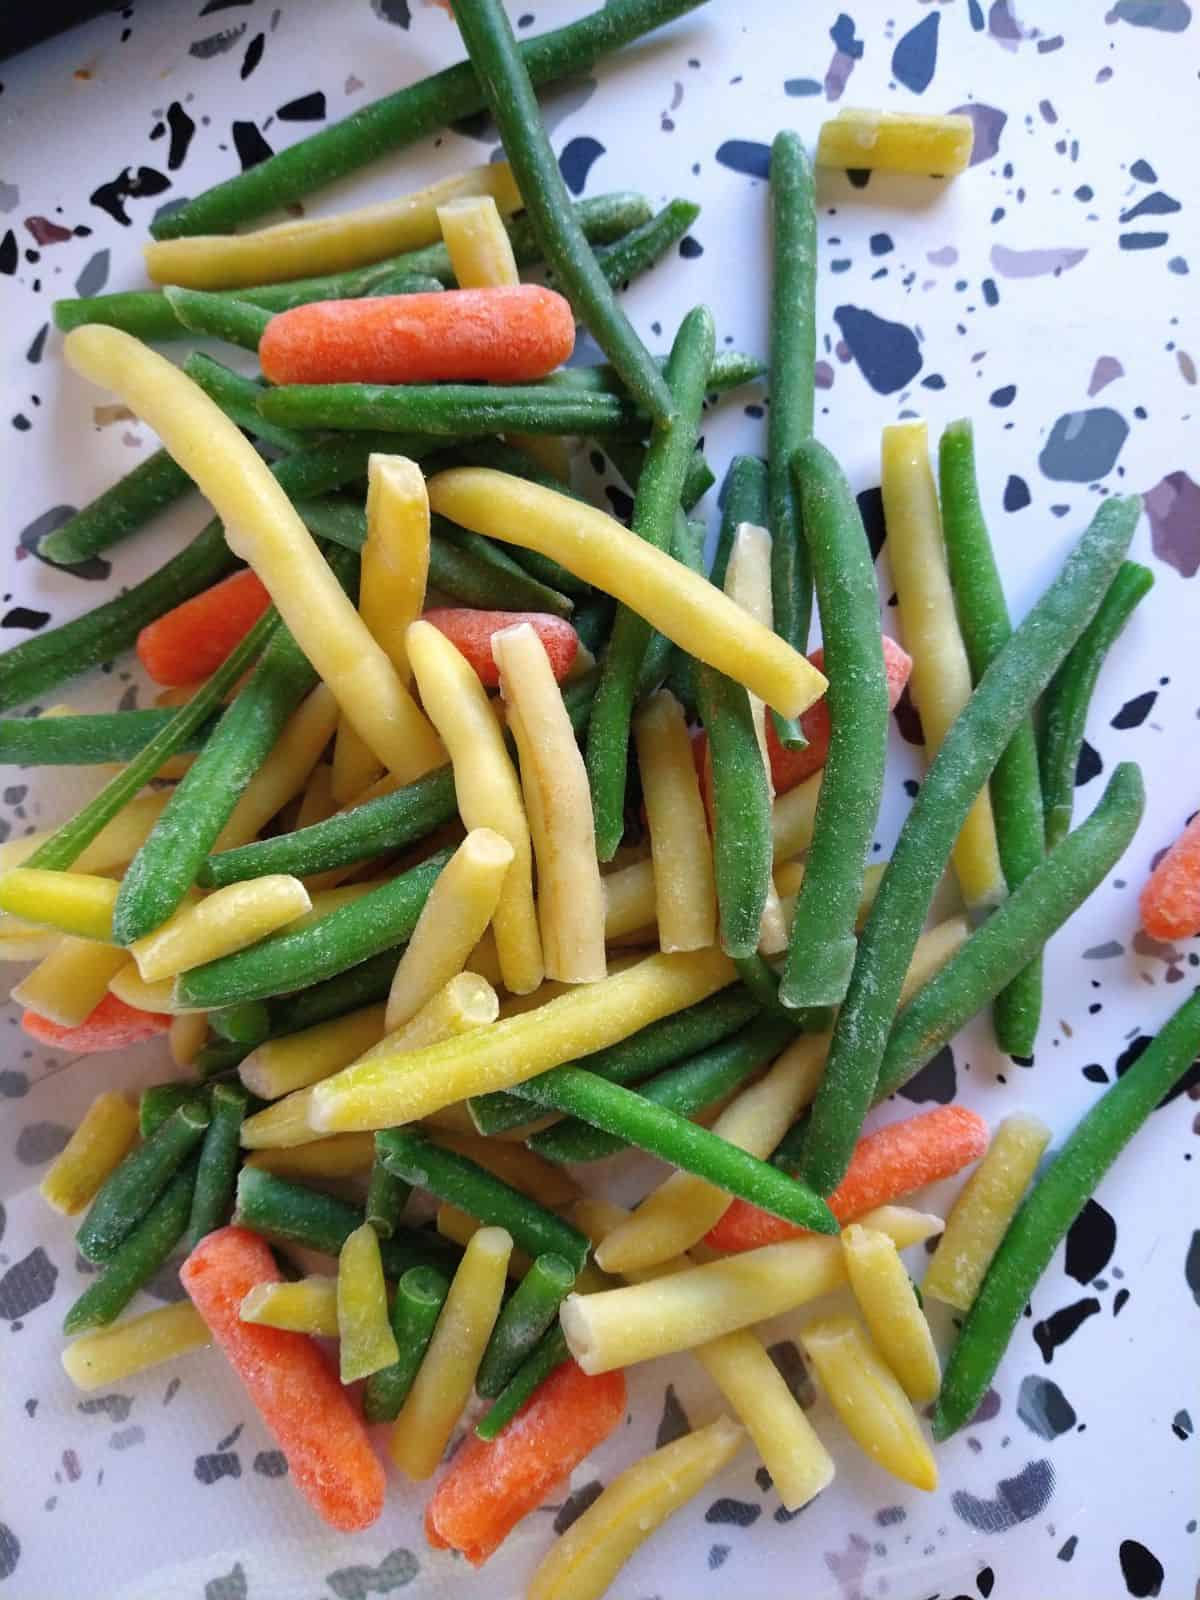 Frozen green beans, wax beans, and baby carrots sitting on a table with a white surface with colored spots.